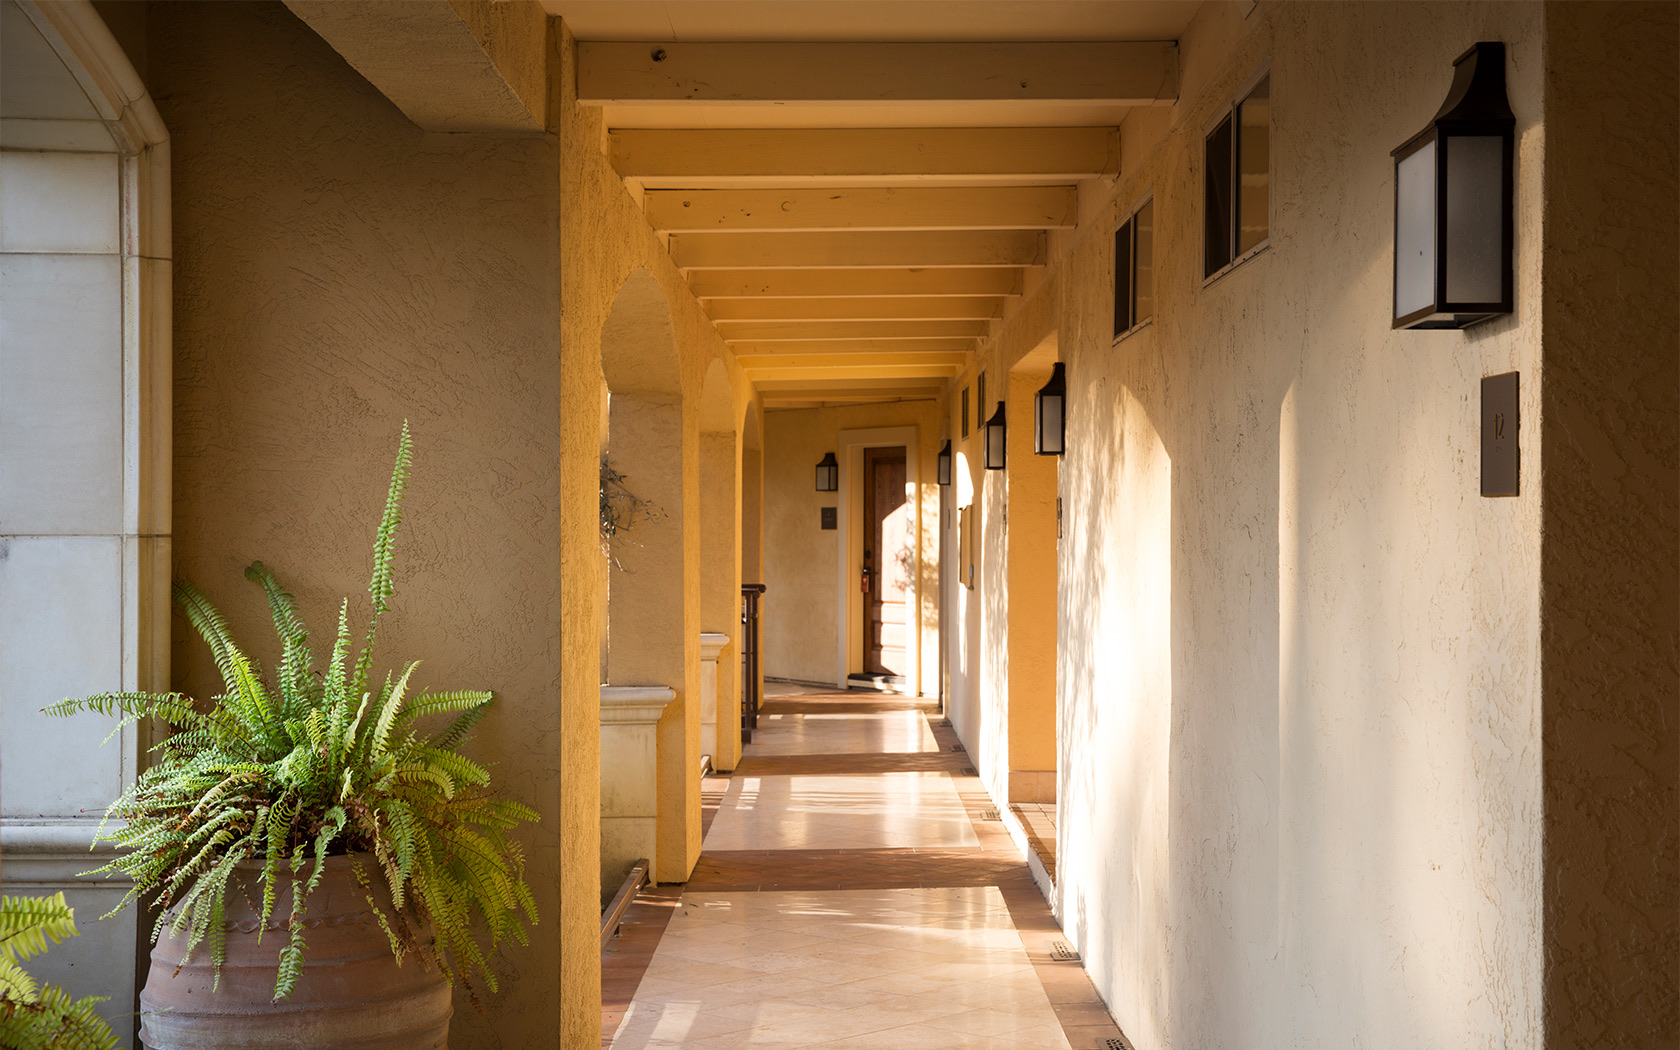 View of a large hallway at day 